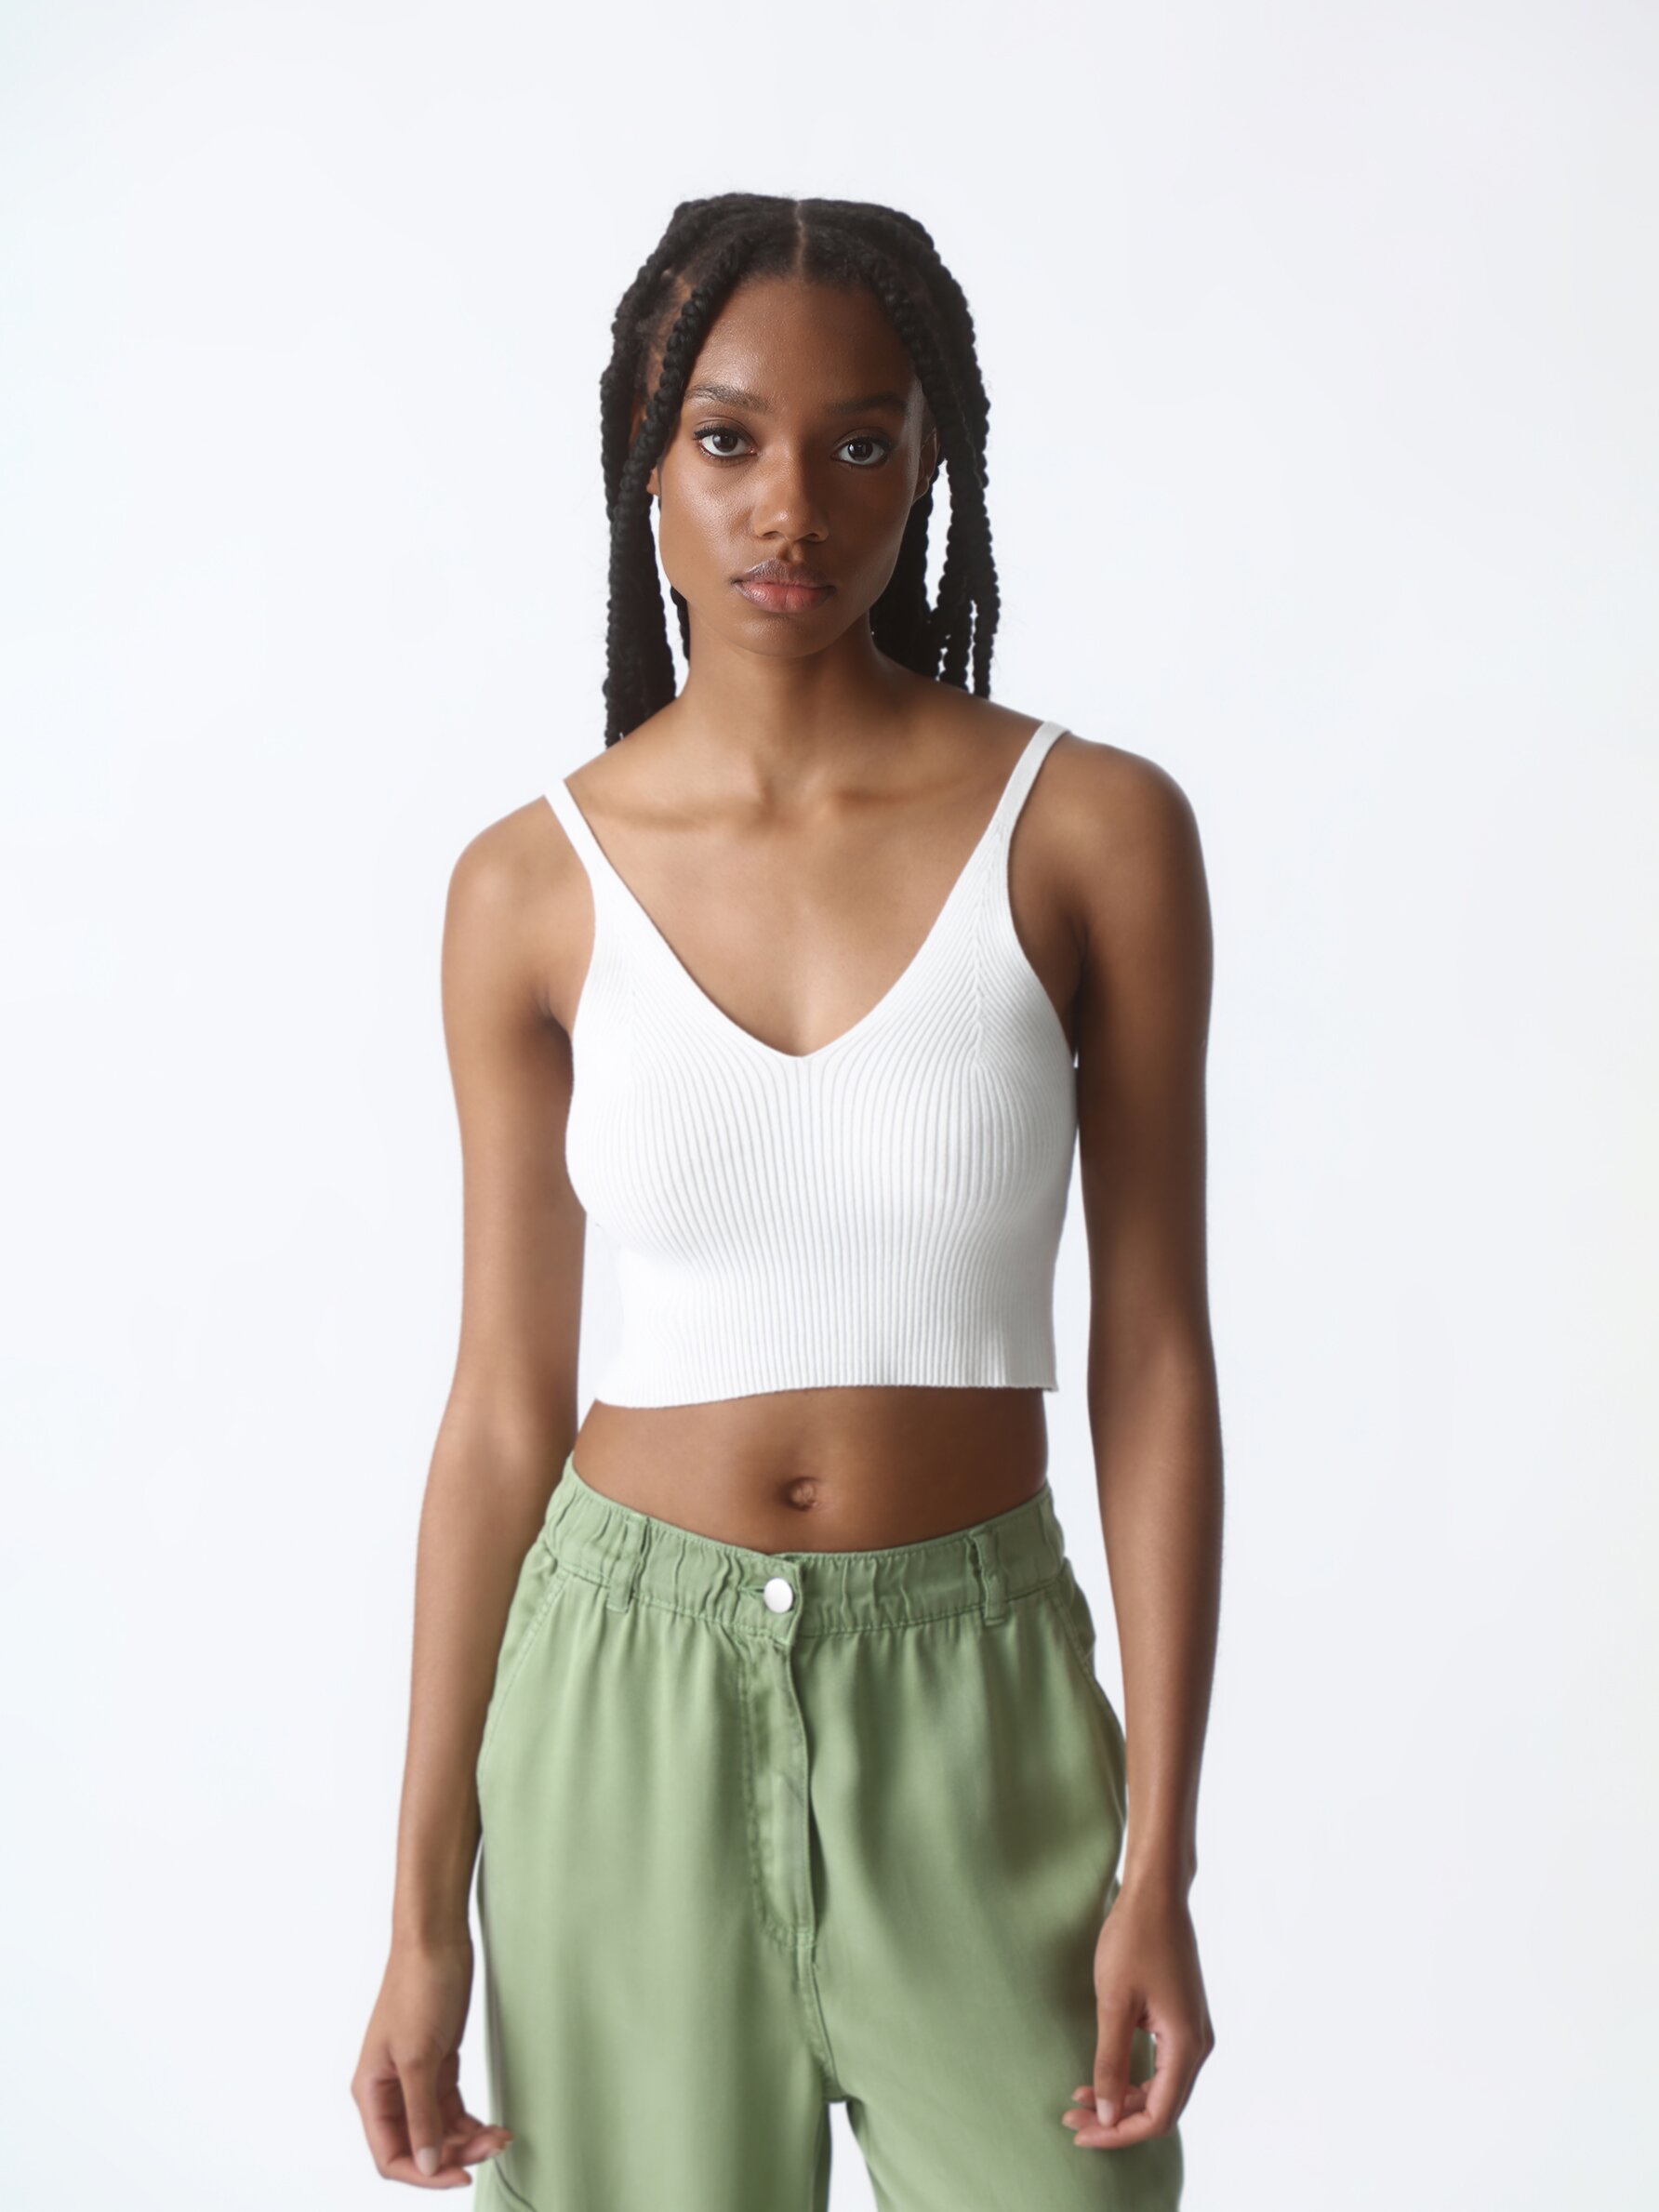 Knit crop top - Knit - CLOTHING - Woman 